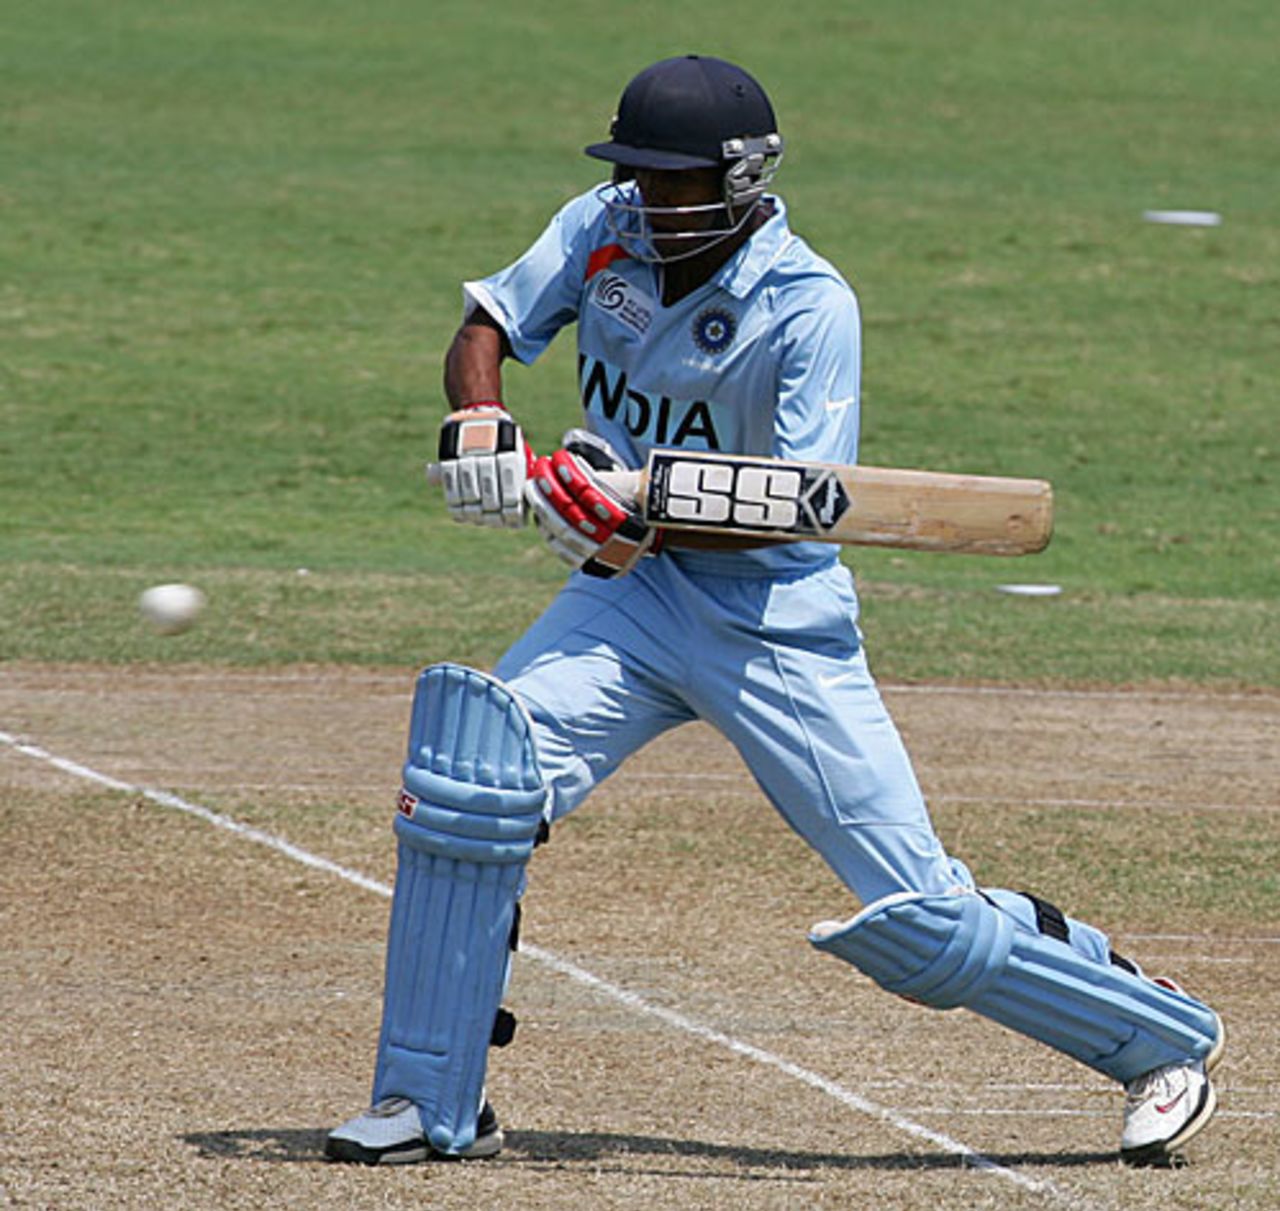 Tanmay Srivastava prepares to cut, India Under-19s v South Africa Under-19s, Group B, Under-19 World Cup, Kuala Lumpur, February 19, 2008 




